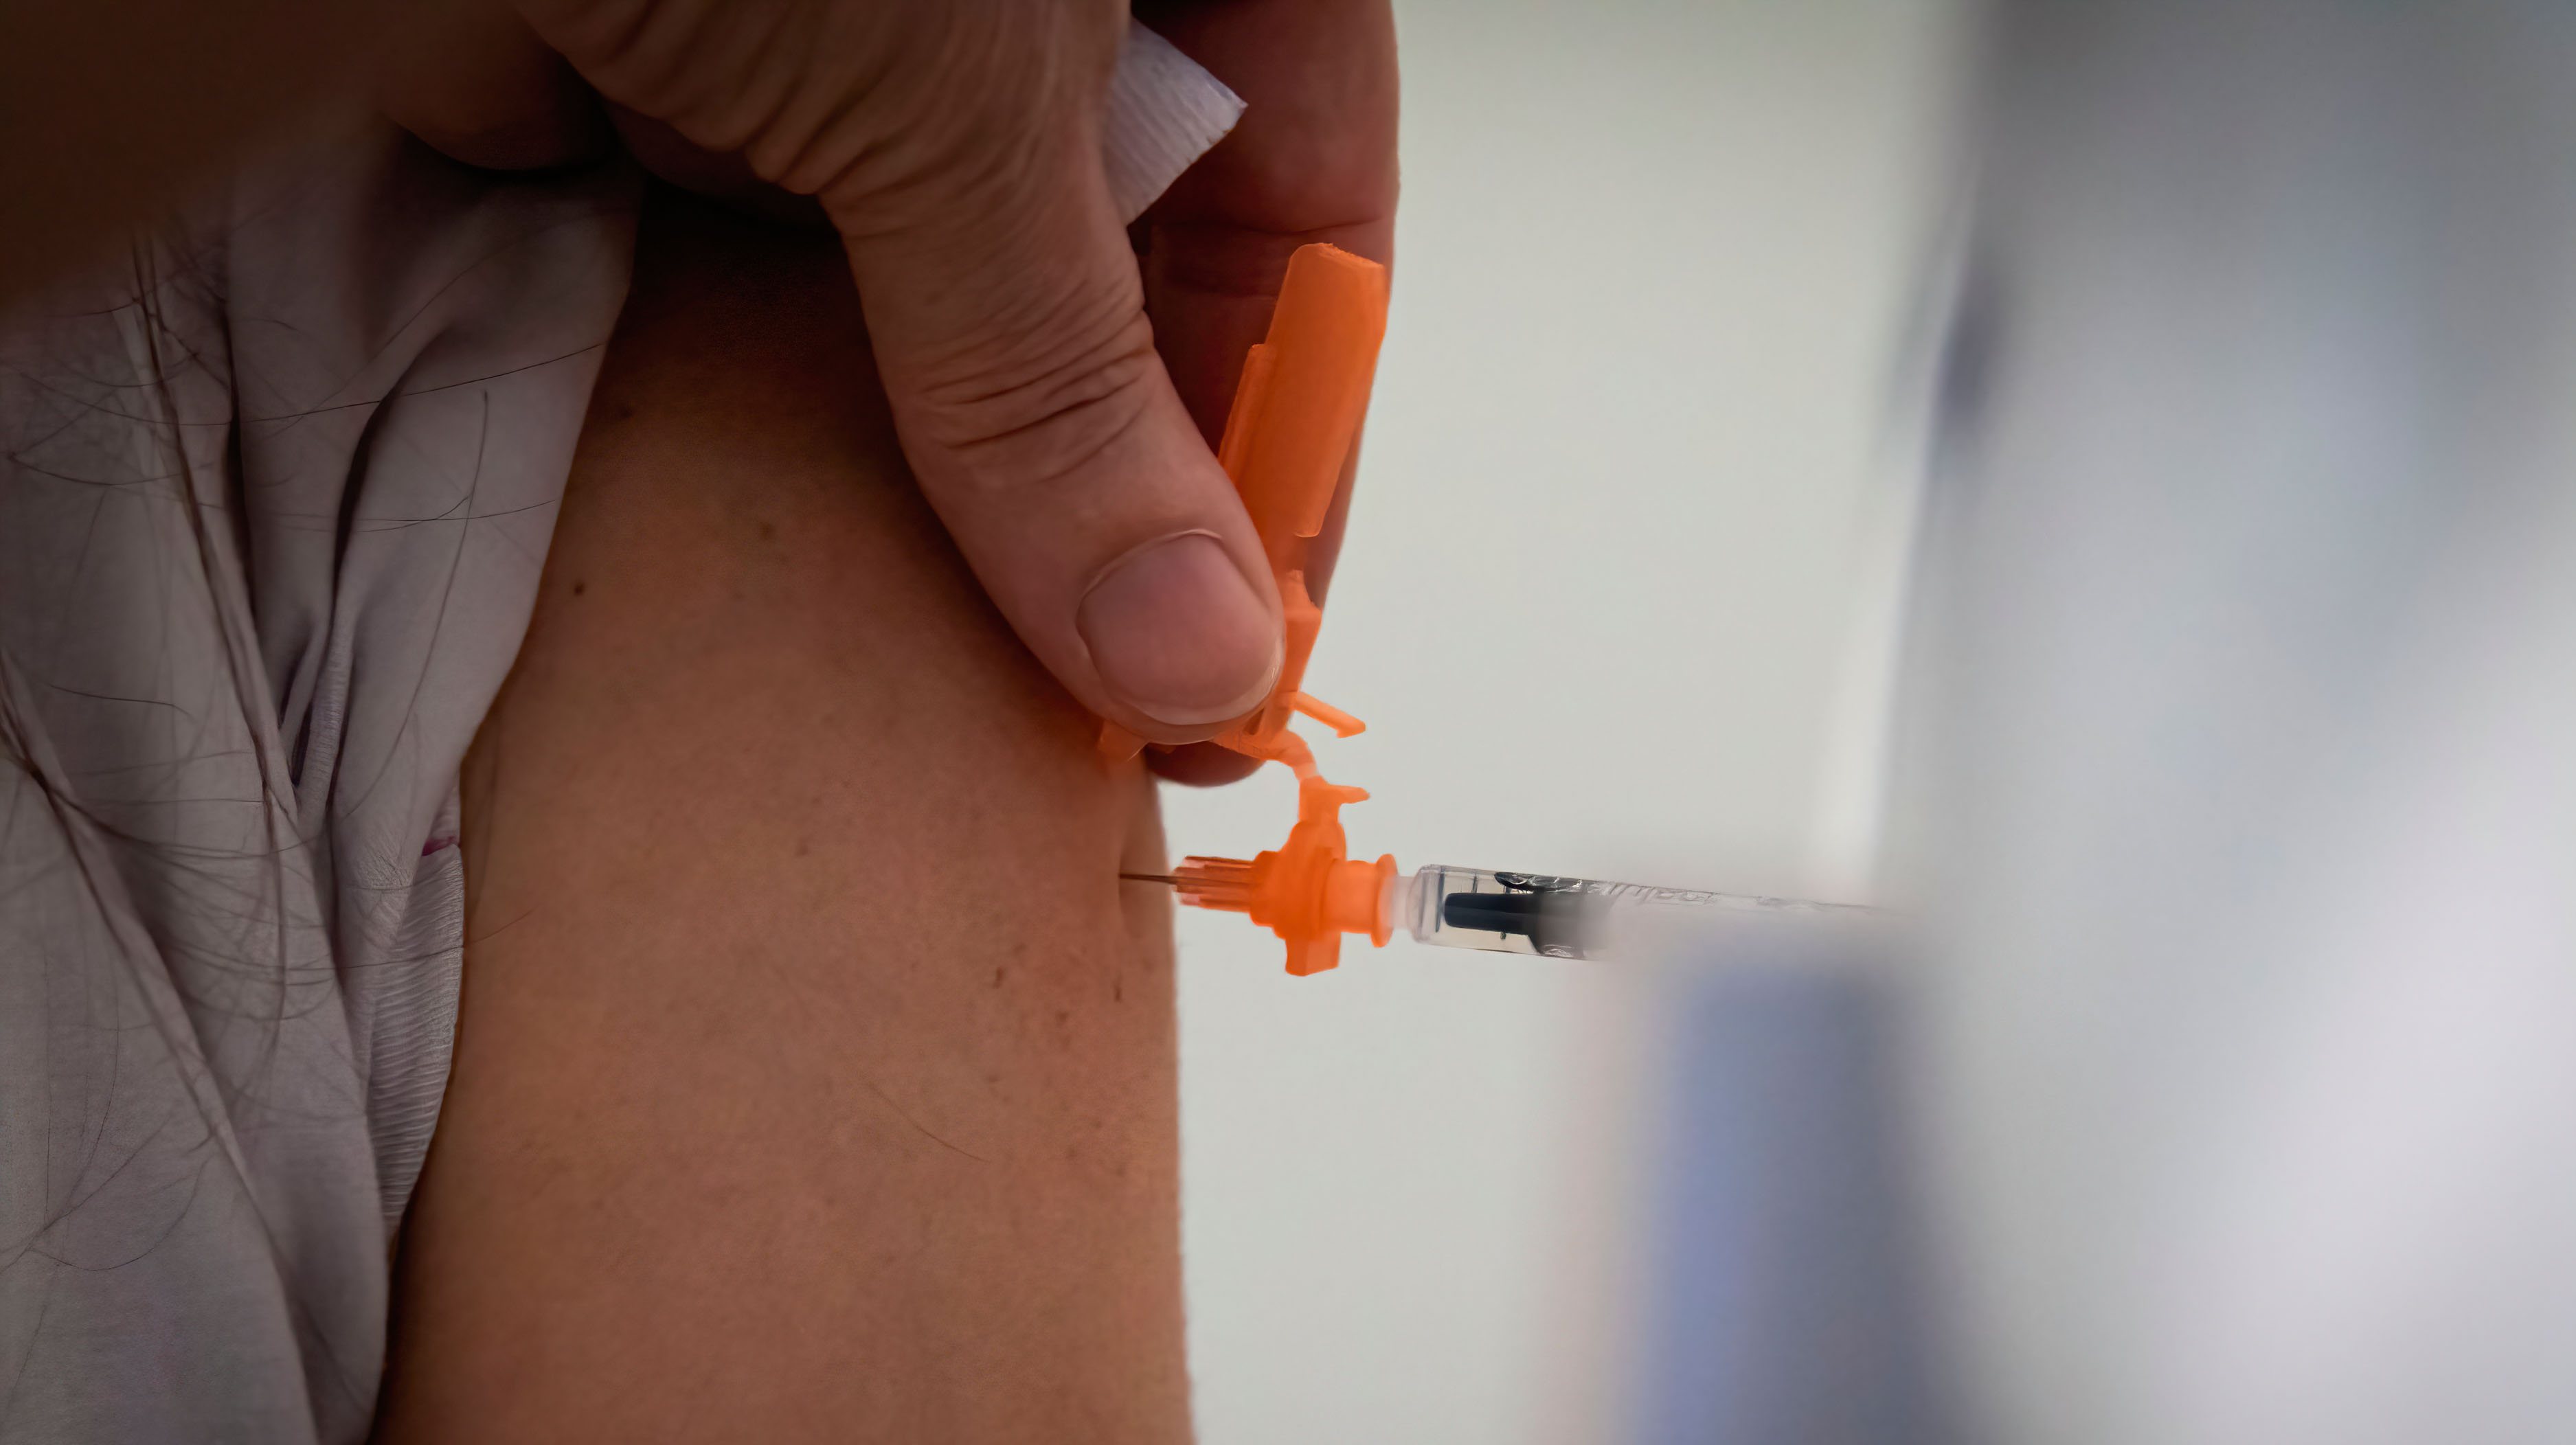 A woman is being vaccinated against covid-19 at Matosinhos